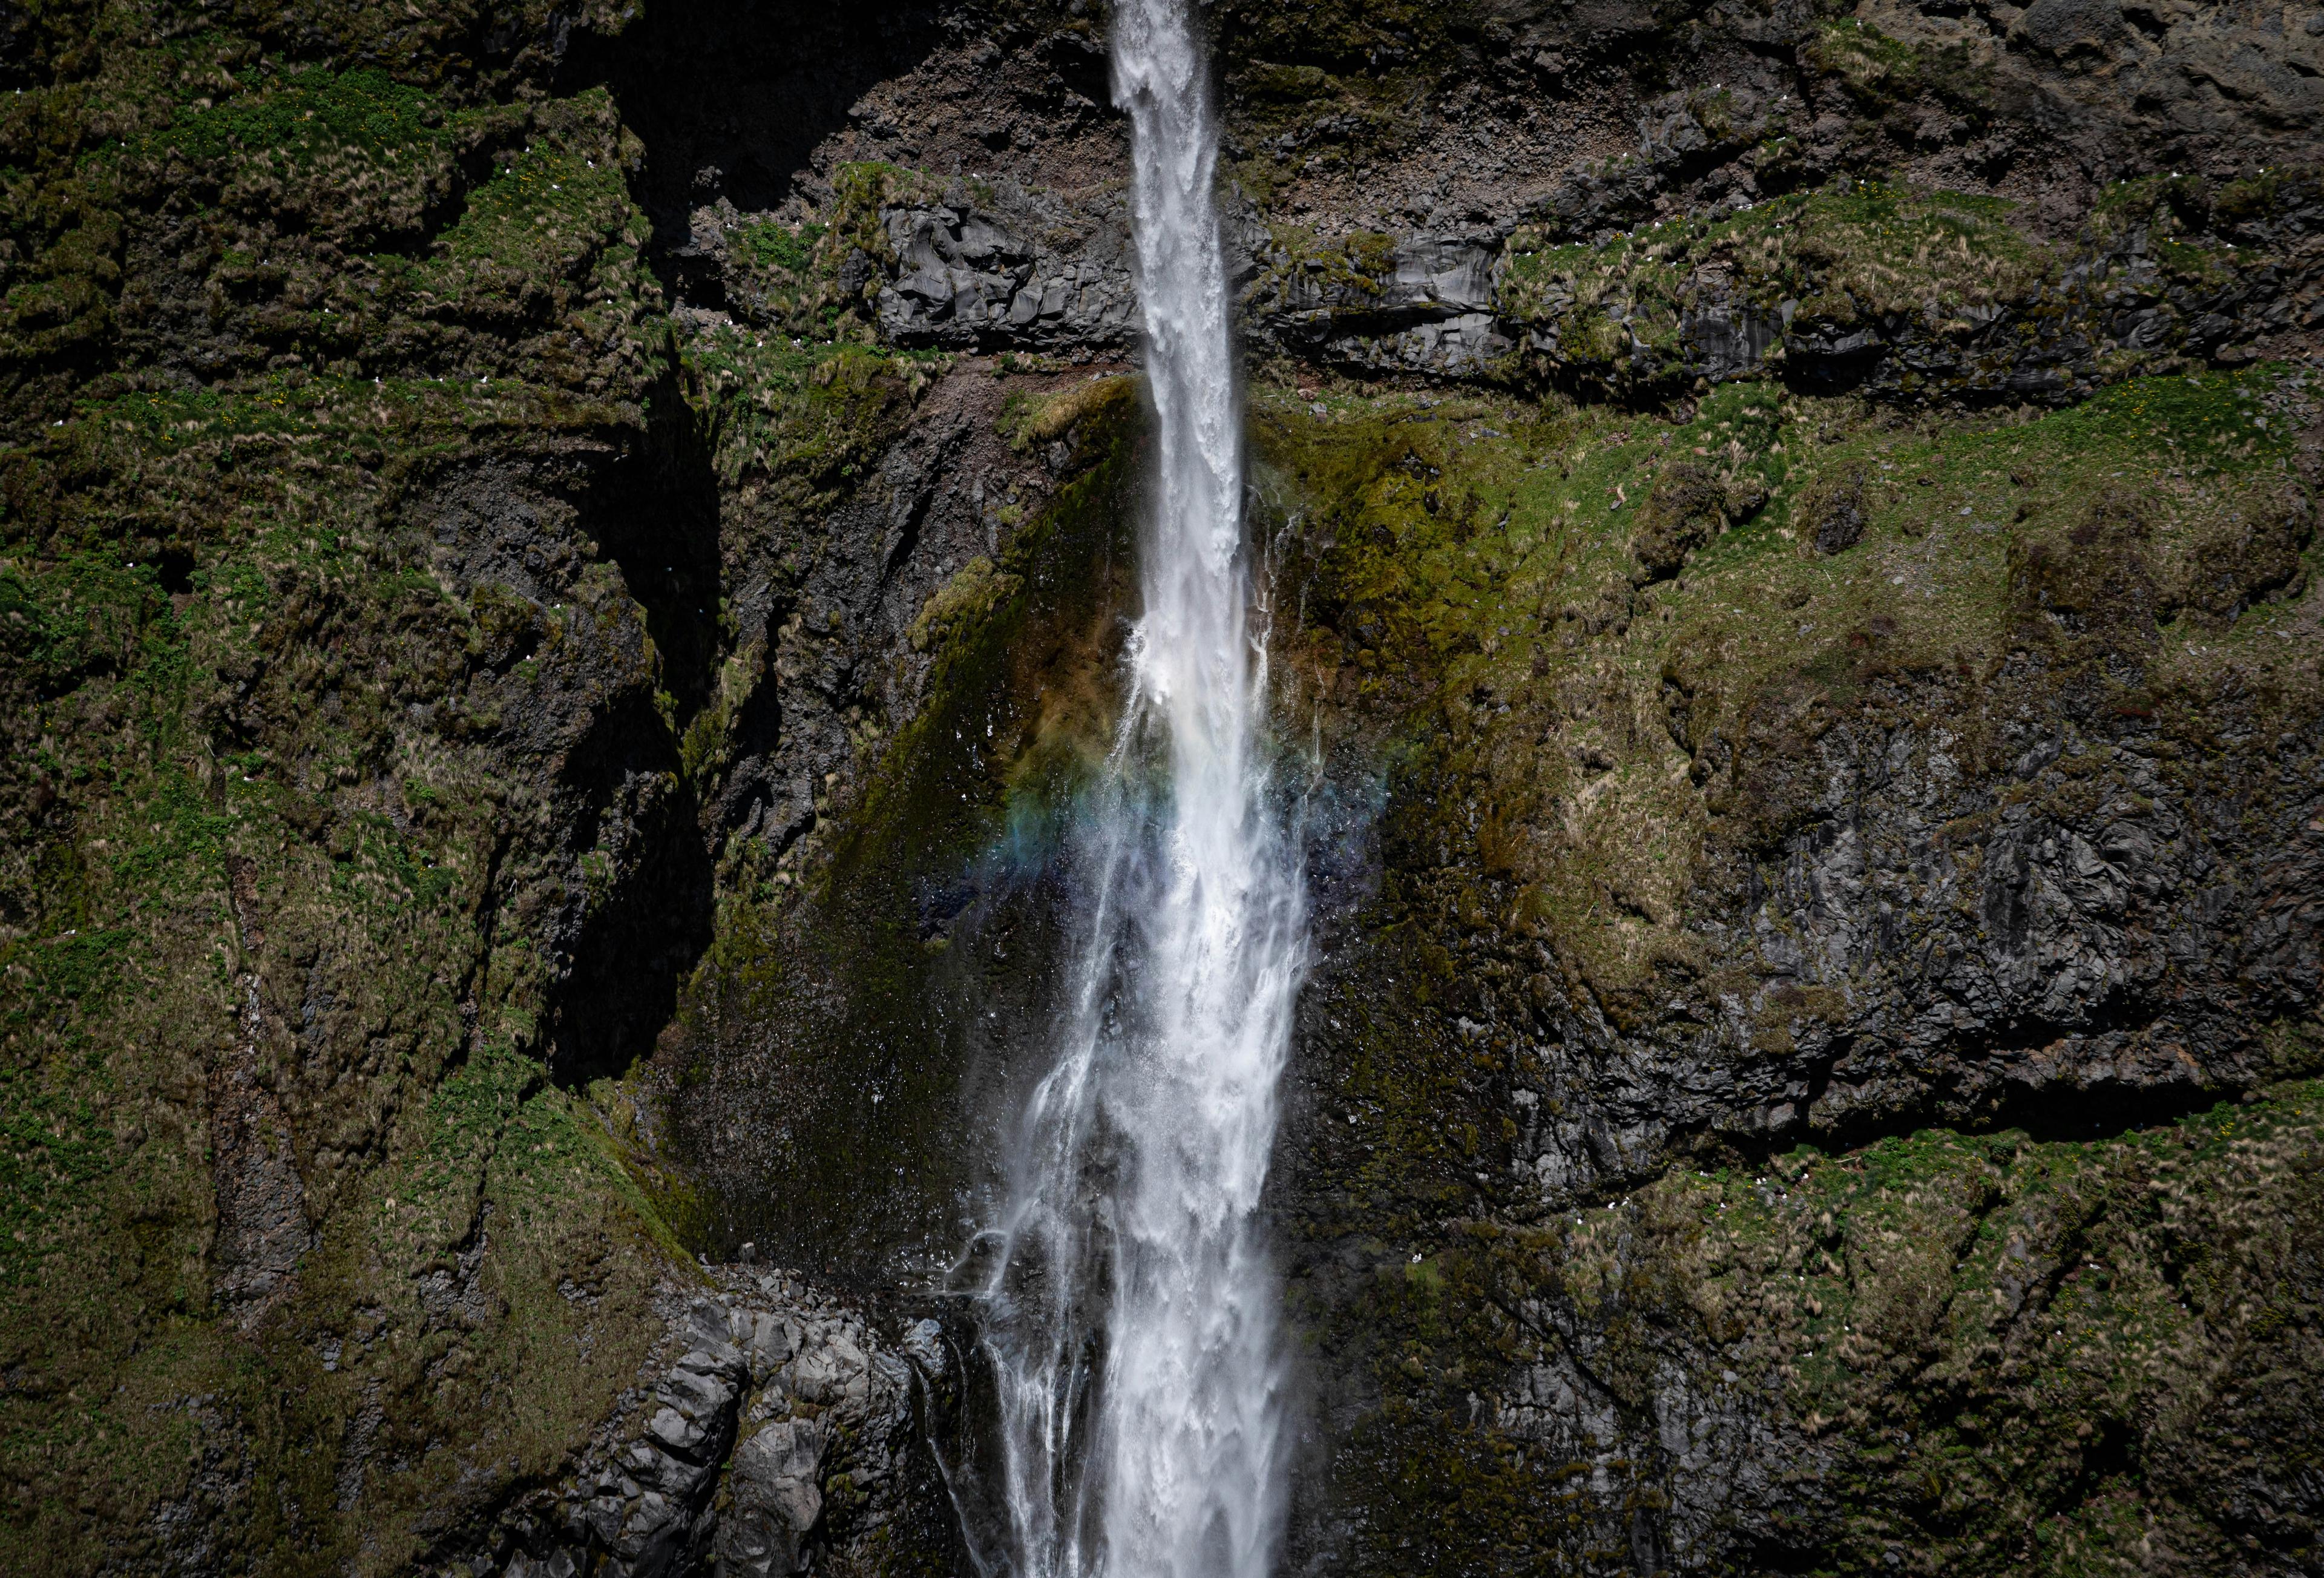 Close-up of a waterfall in Mulagljufur Canyon, capturing the water's descent and a rainbow forming in the spray against dark rocky cliffs.